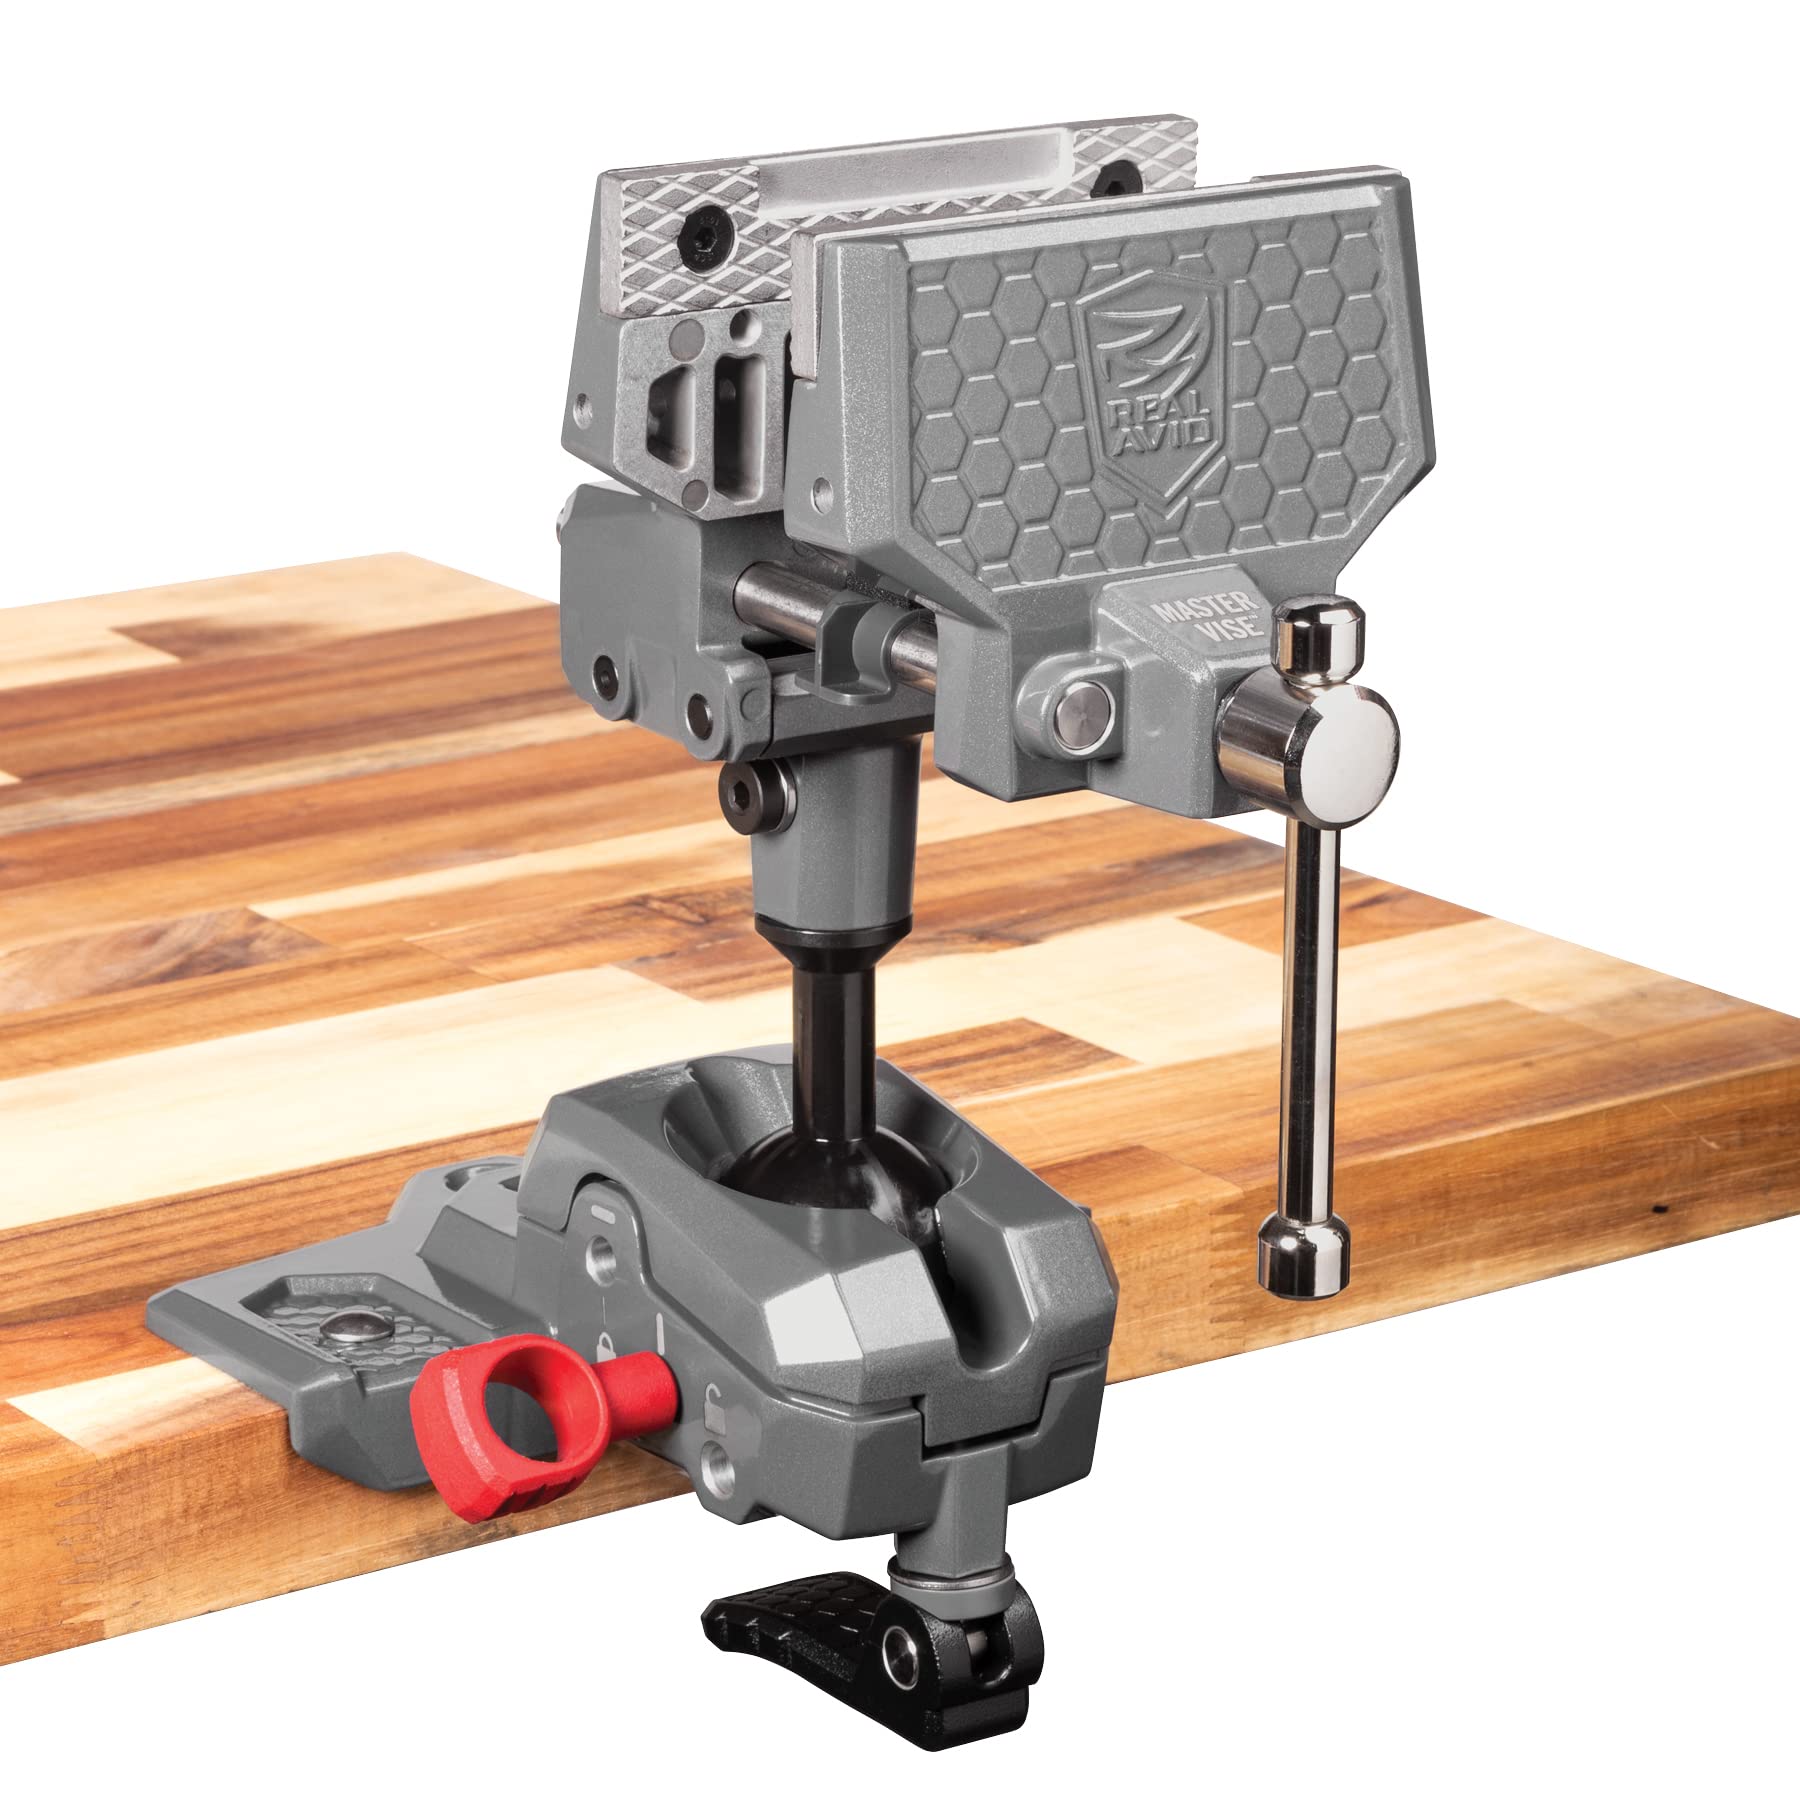 Real Avid Precision Gun Vise with Clamping Vise Jaws Swiveling Vise Body Multi-Use Handsfree Bench Vise for Scope Mounting